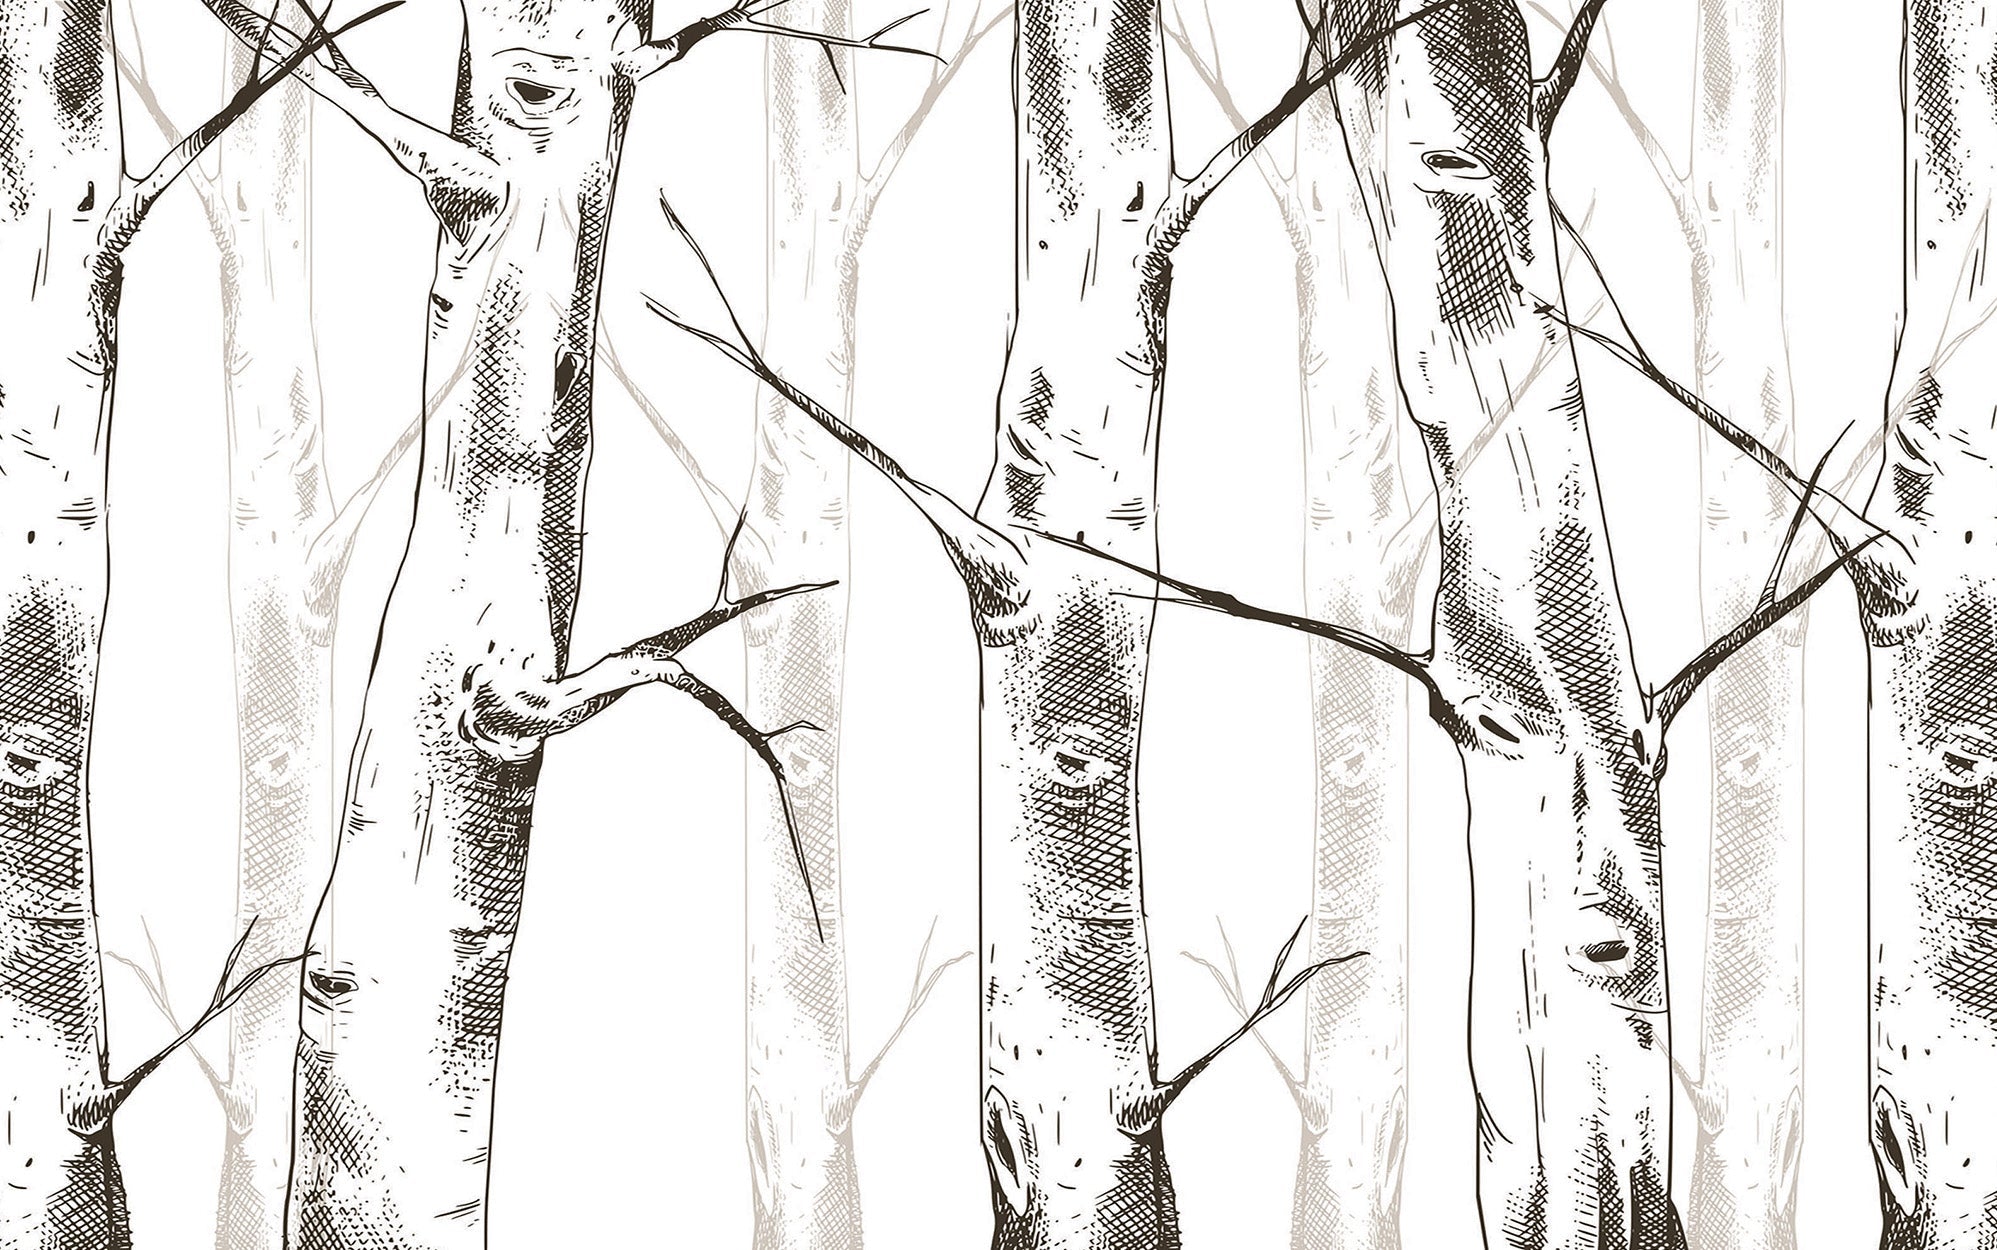 Black and white sketch of tree trunks on a wall mural creating a forest-like appearance in an interior setting